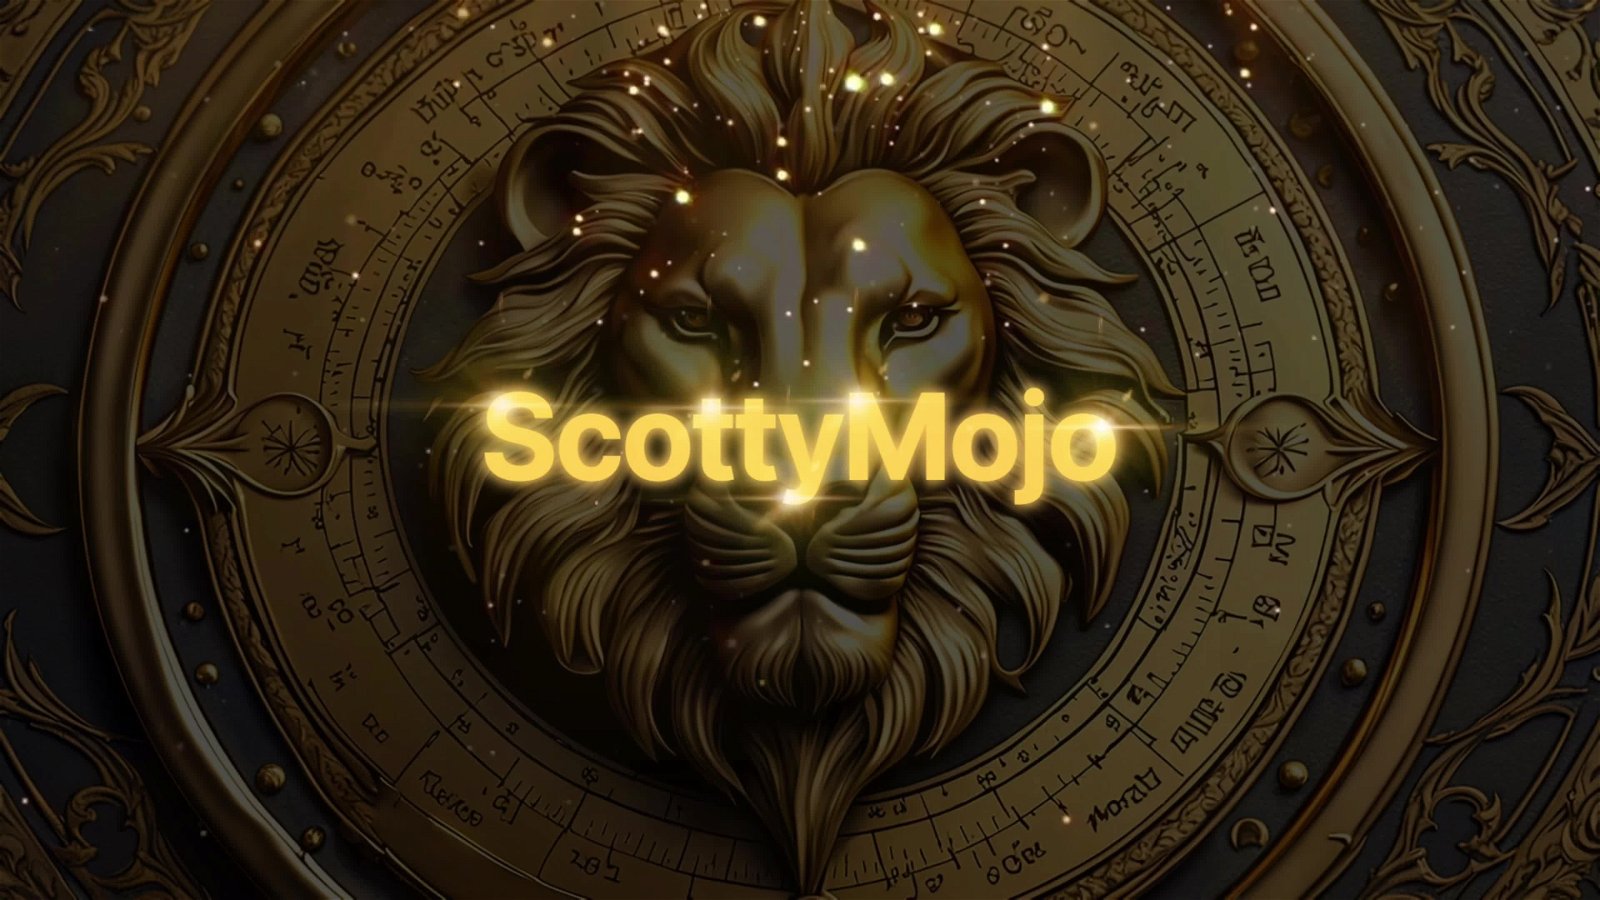 Video by Scotty Mojo with the username @ScottyMojo,  January 20, 2024 at 1:45 AM and the text says 'Need support?

------------------
- Support Ticket -
------------------

You can open a Support ticket at the following:
https://sharesome.freshdesk.com/support/home

---------------------------
- Support Chat Message -..'